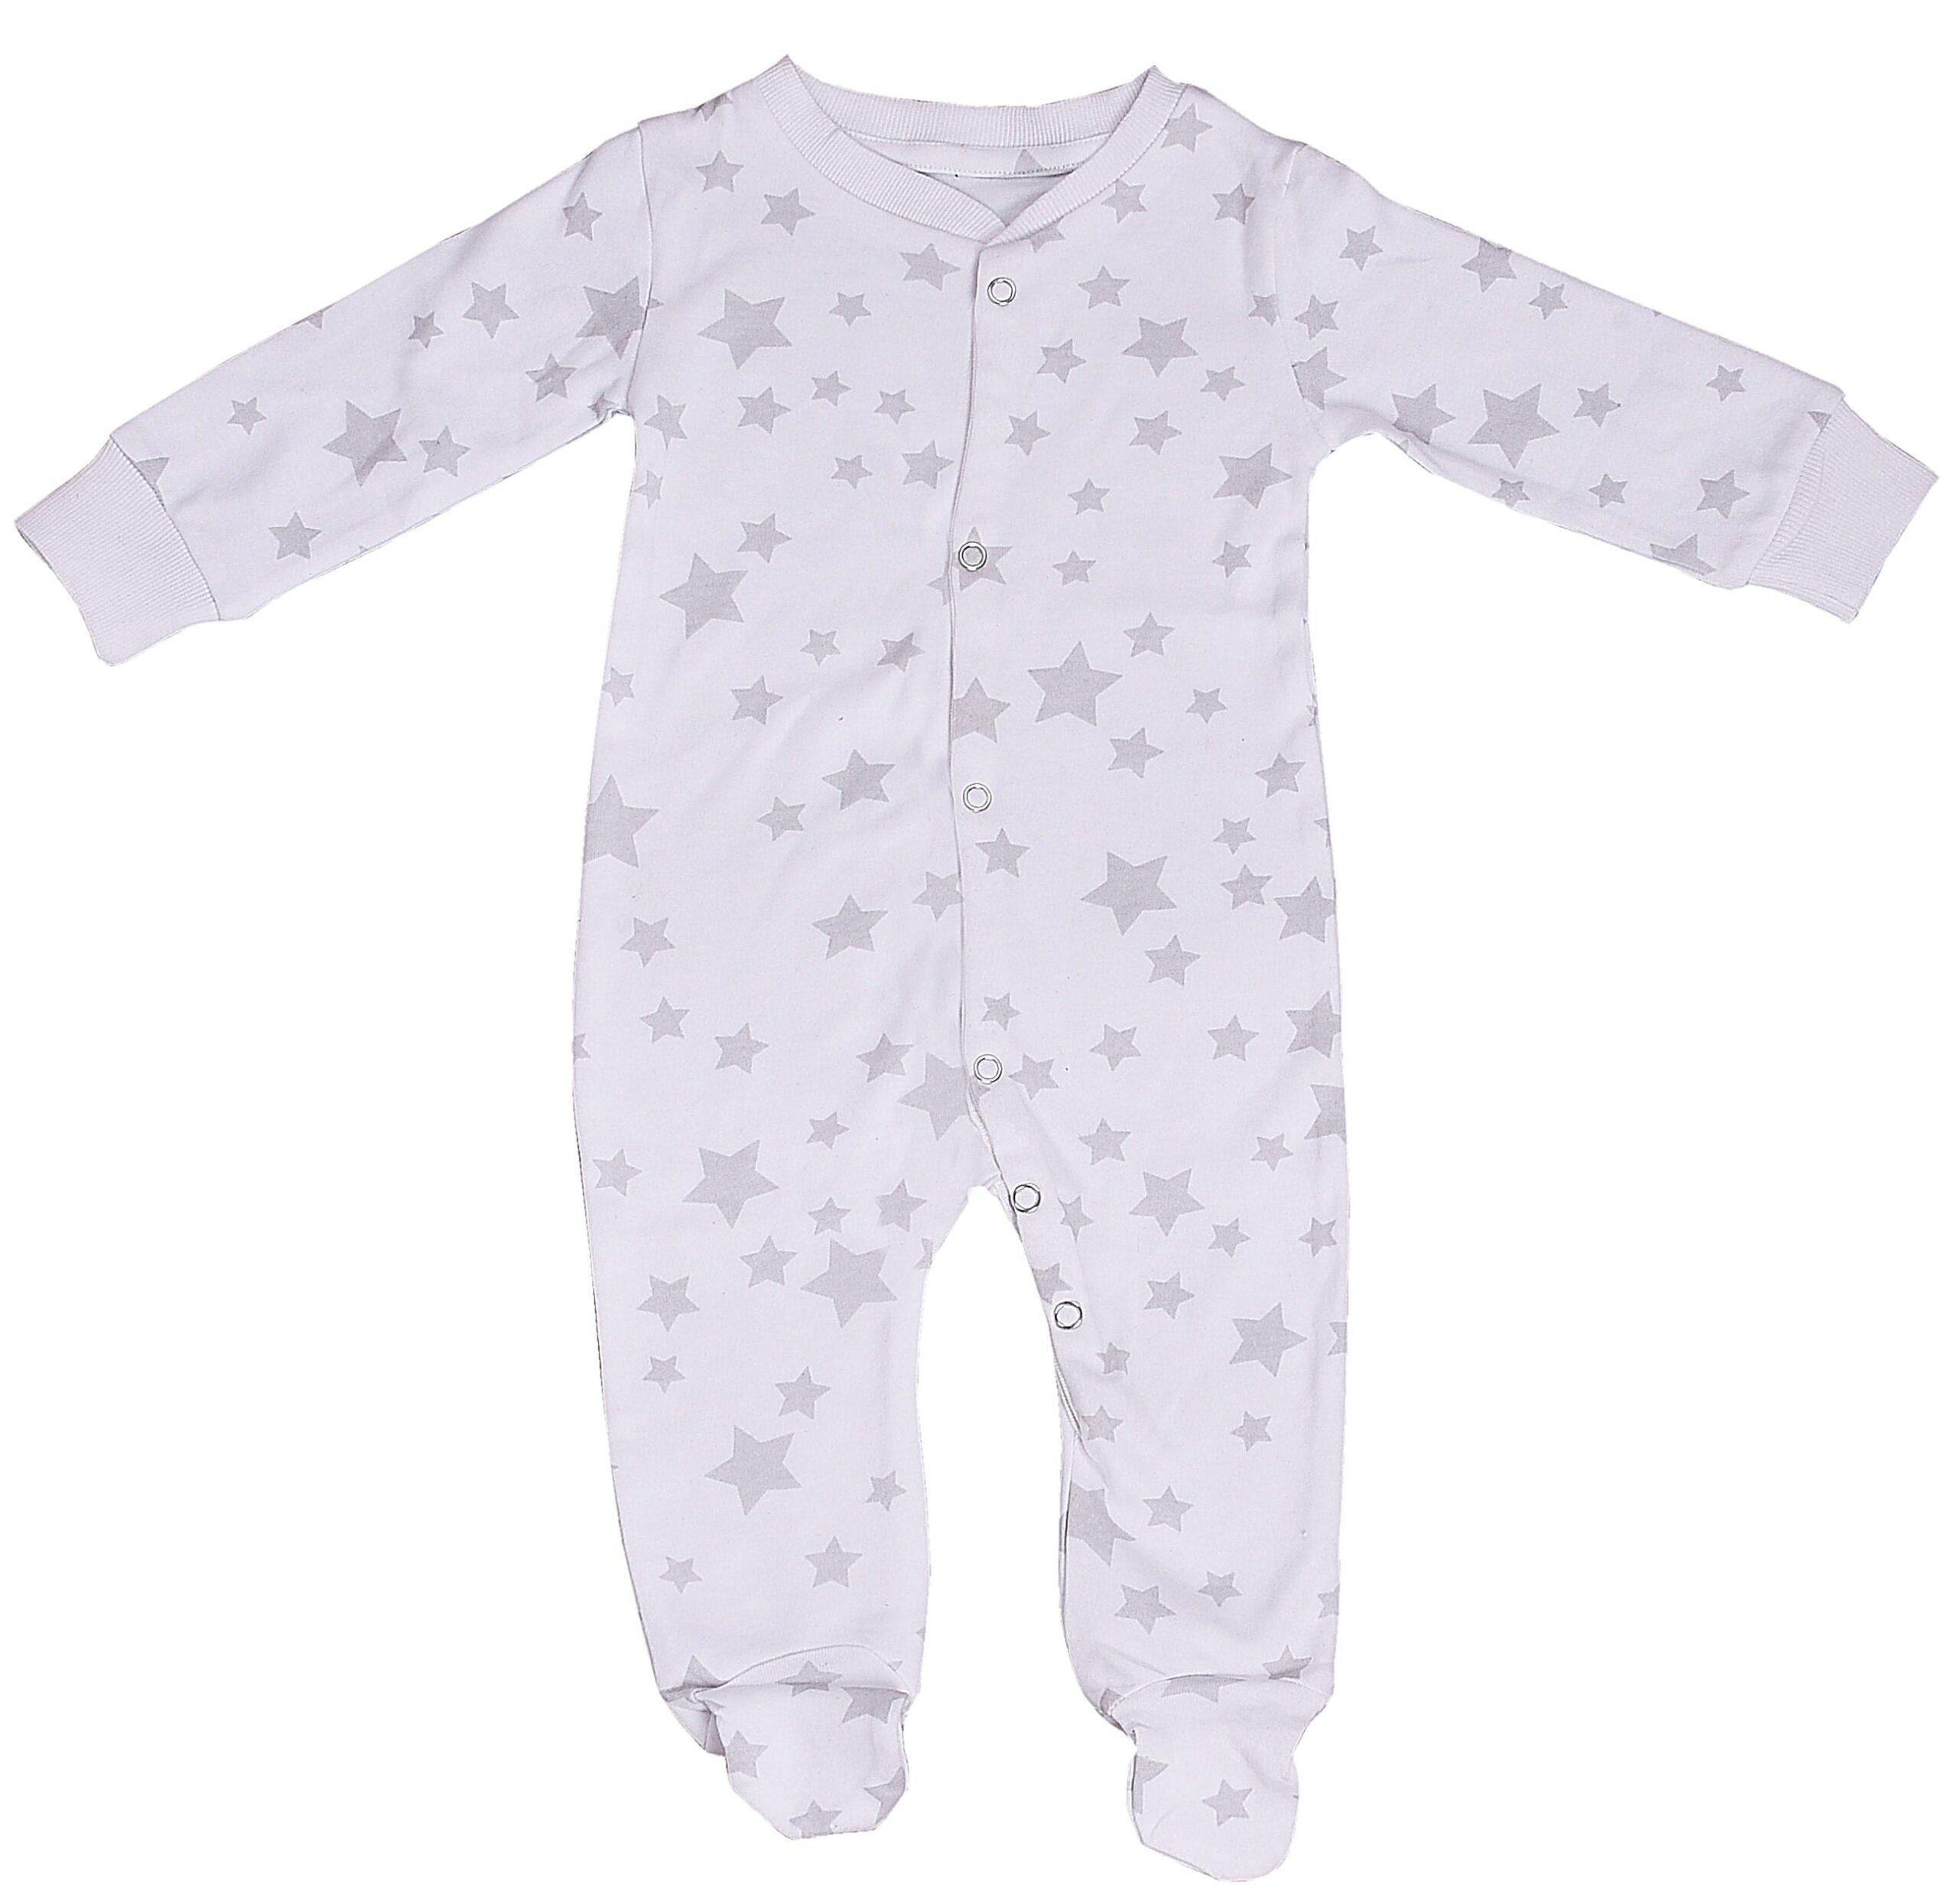 Baby Unisex Full Body Romper Footie – Bird and Star Print Pack of 2